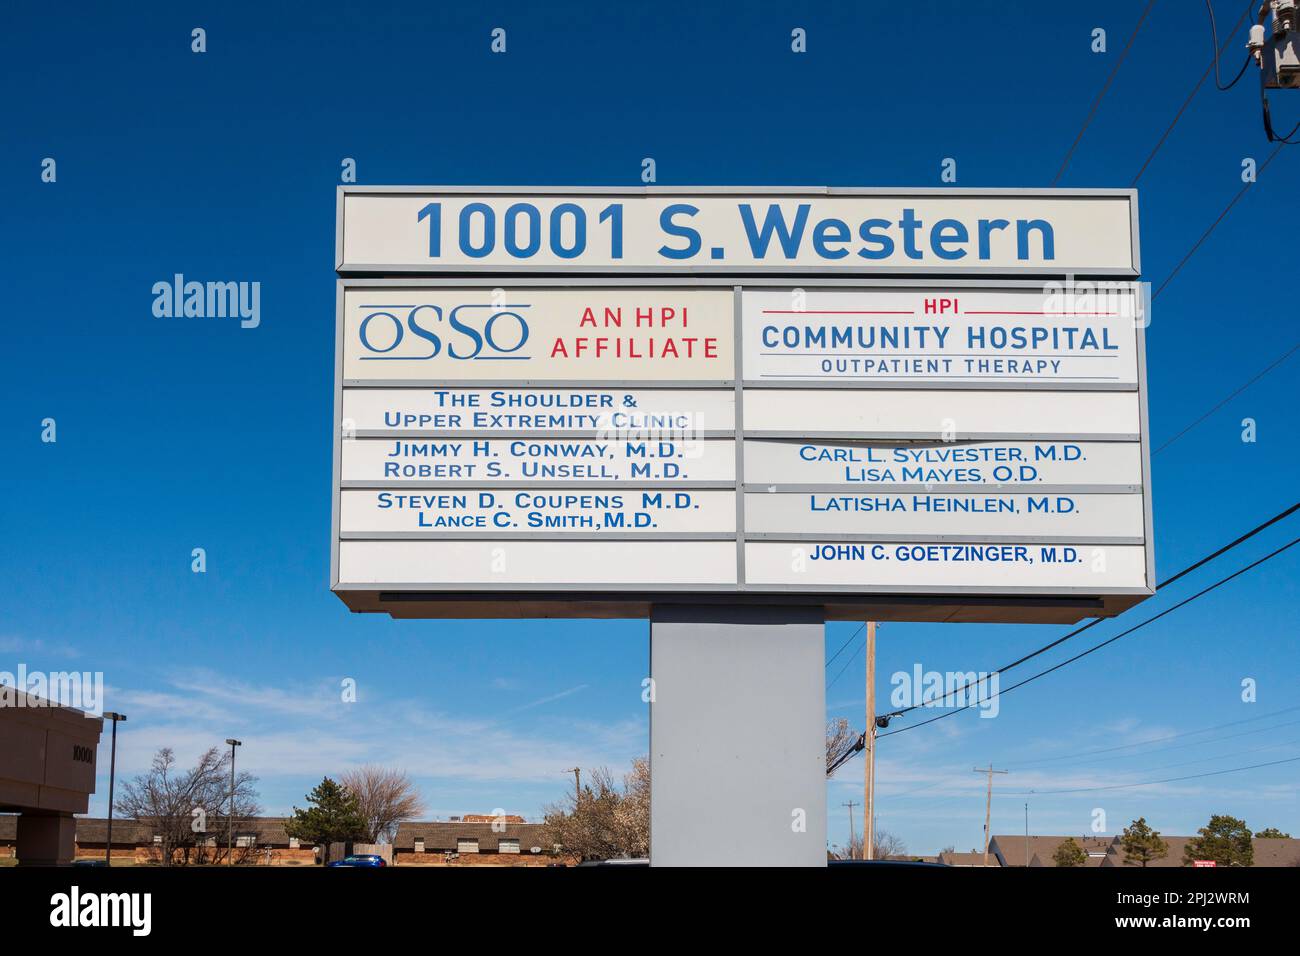 Oklahoma Sports Science & Orthopedics or OSSO Large sign advertising doctors and outpatient therapy treatment in Midwest City, Oklahoma, USA. Stock Photo